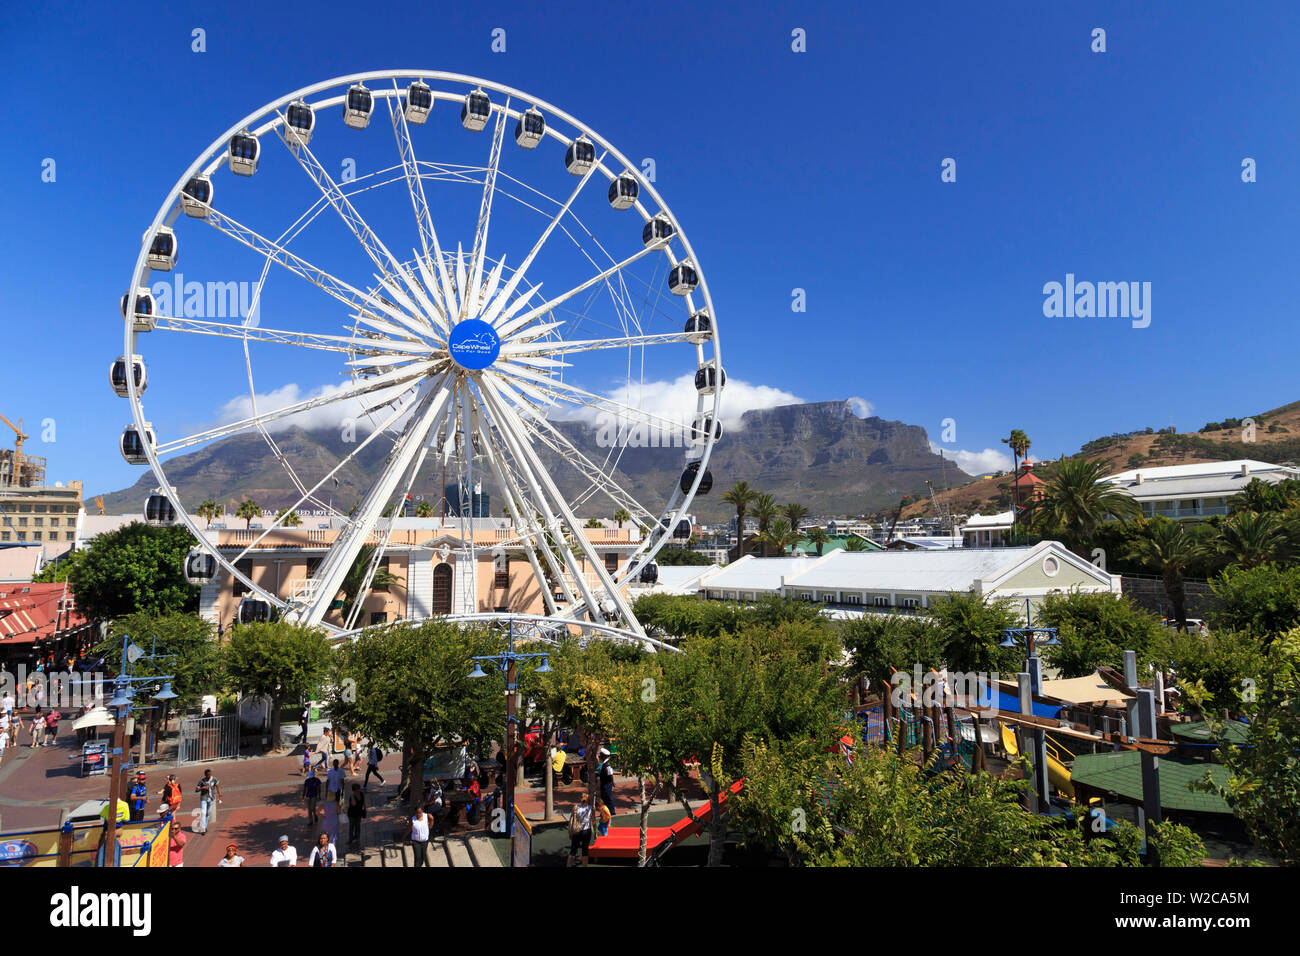 South Africa, Western Cape, Cape Town, Victoria and Alfred Waterfront Complex Stock Photo